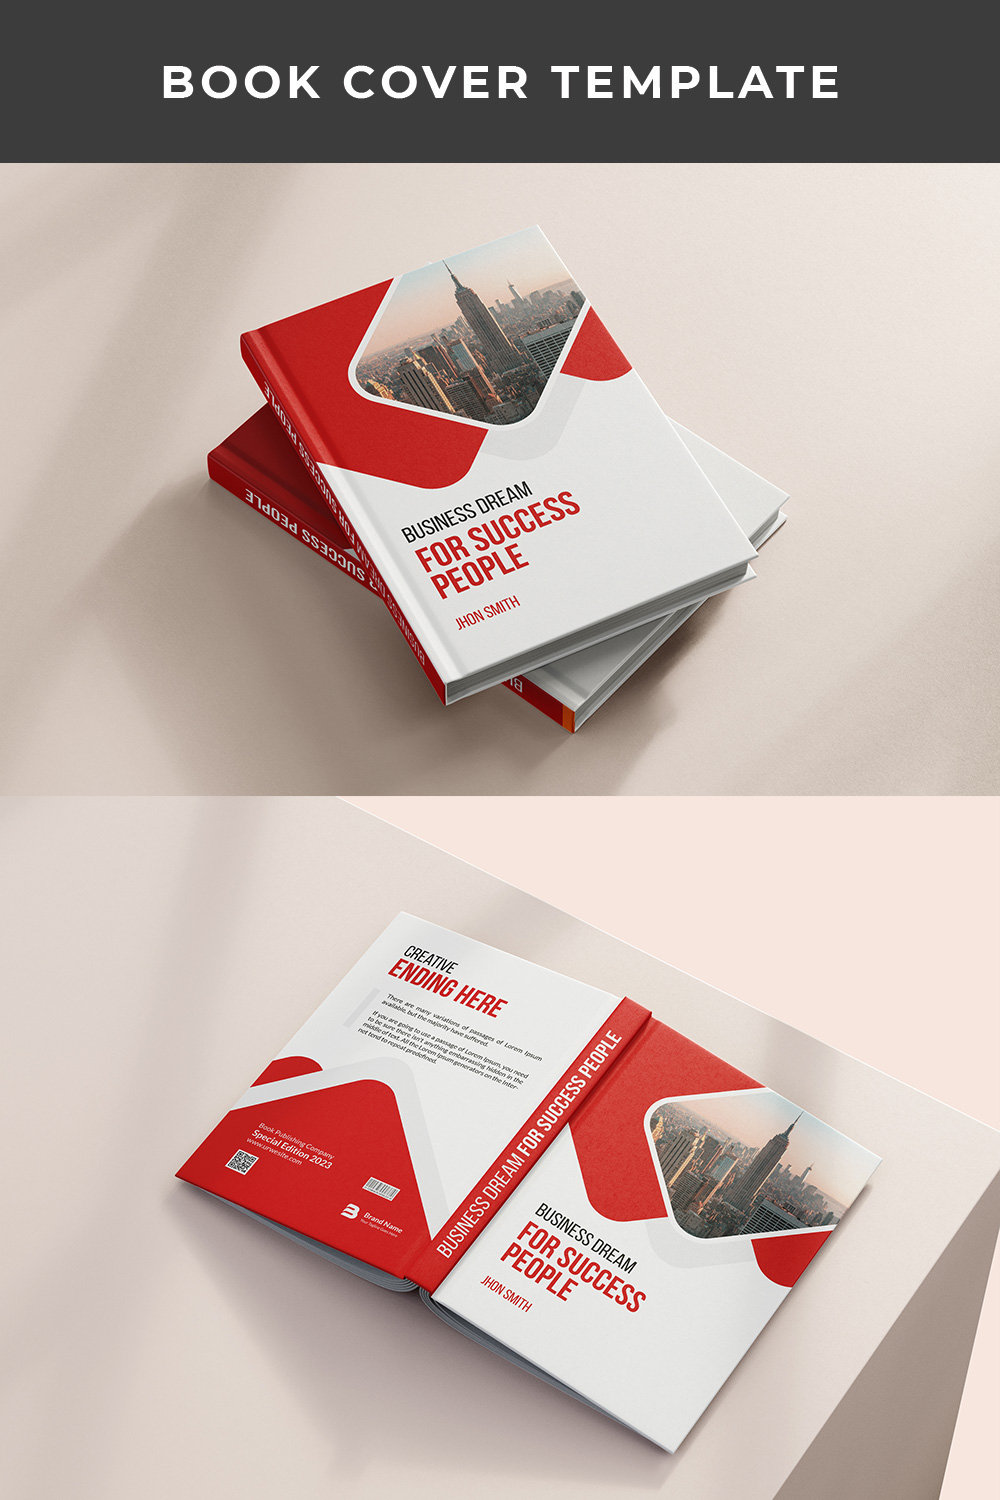 Corporate book cover template pinterest preview image.